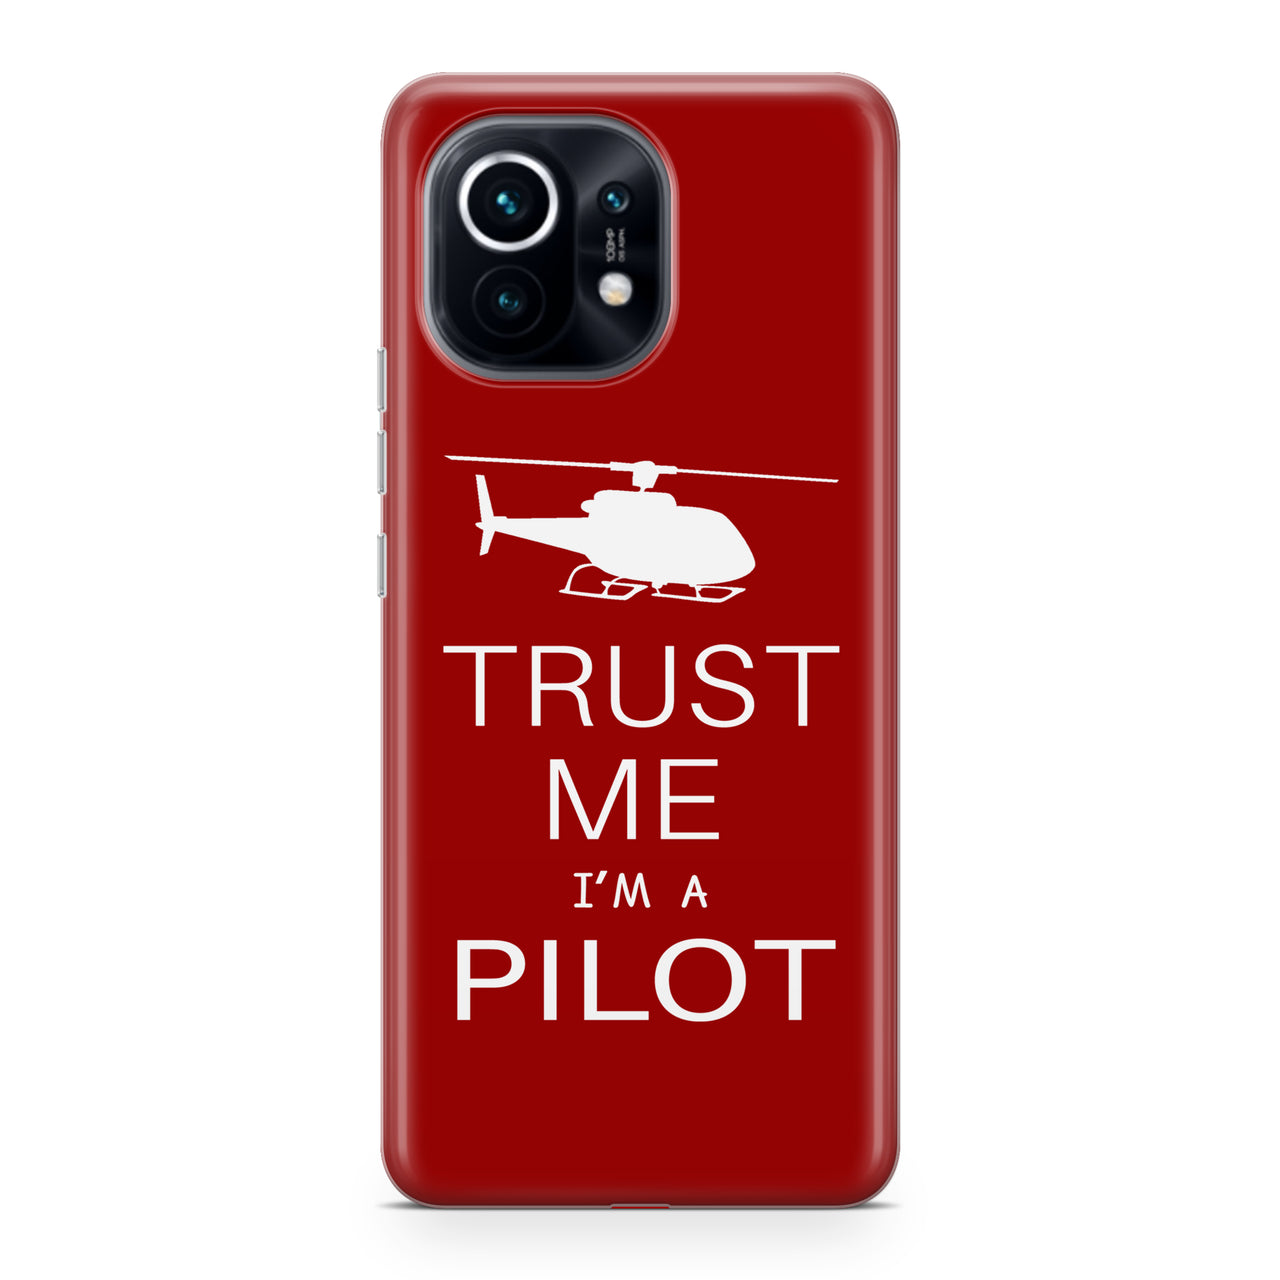 Trust Me I'm a Pilot (Helicopter) Designed Xiaomi Cases